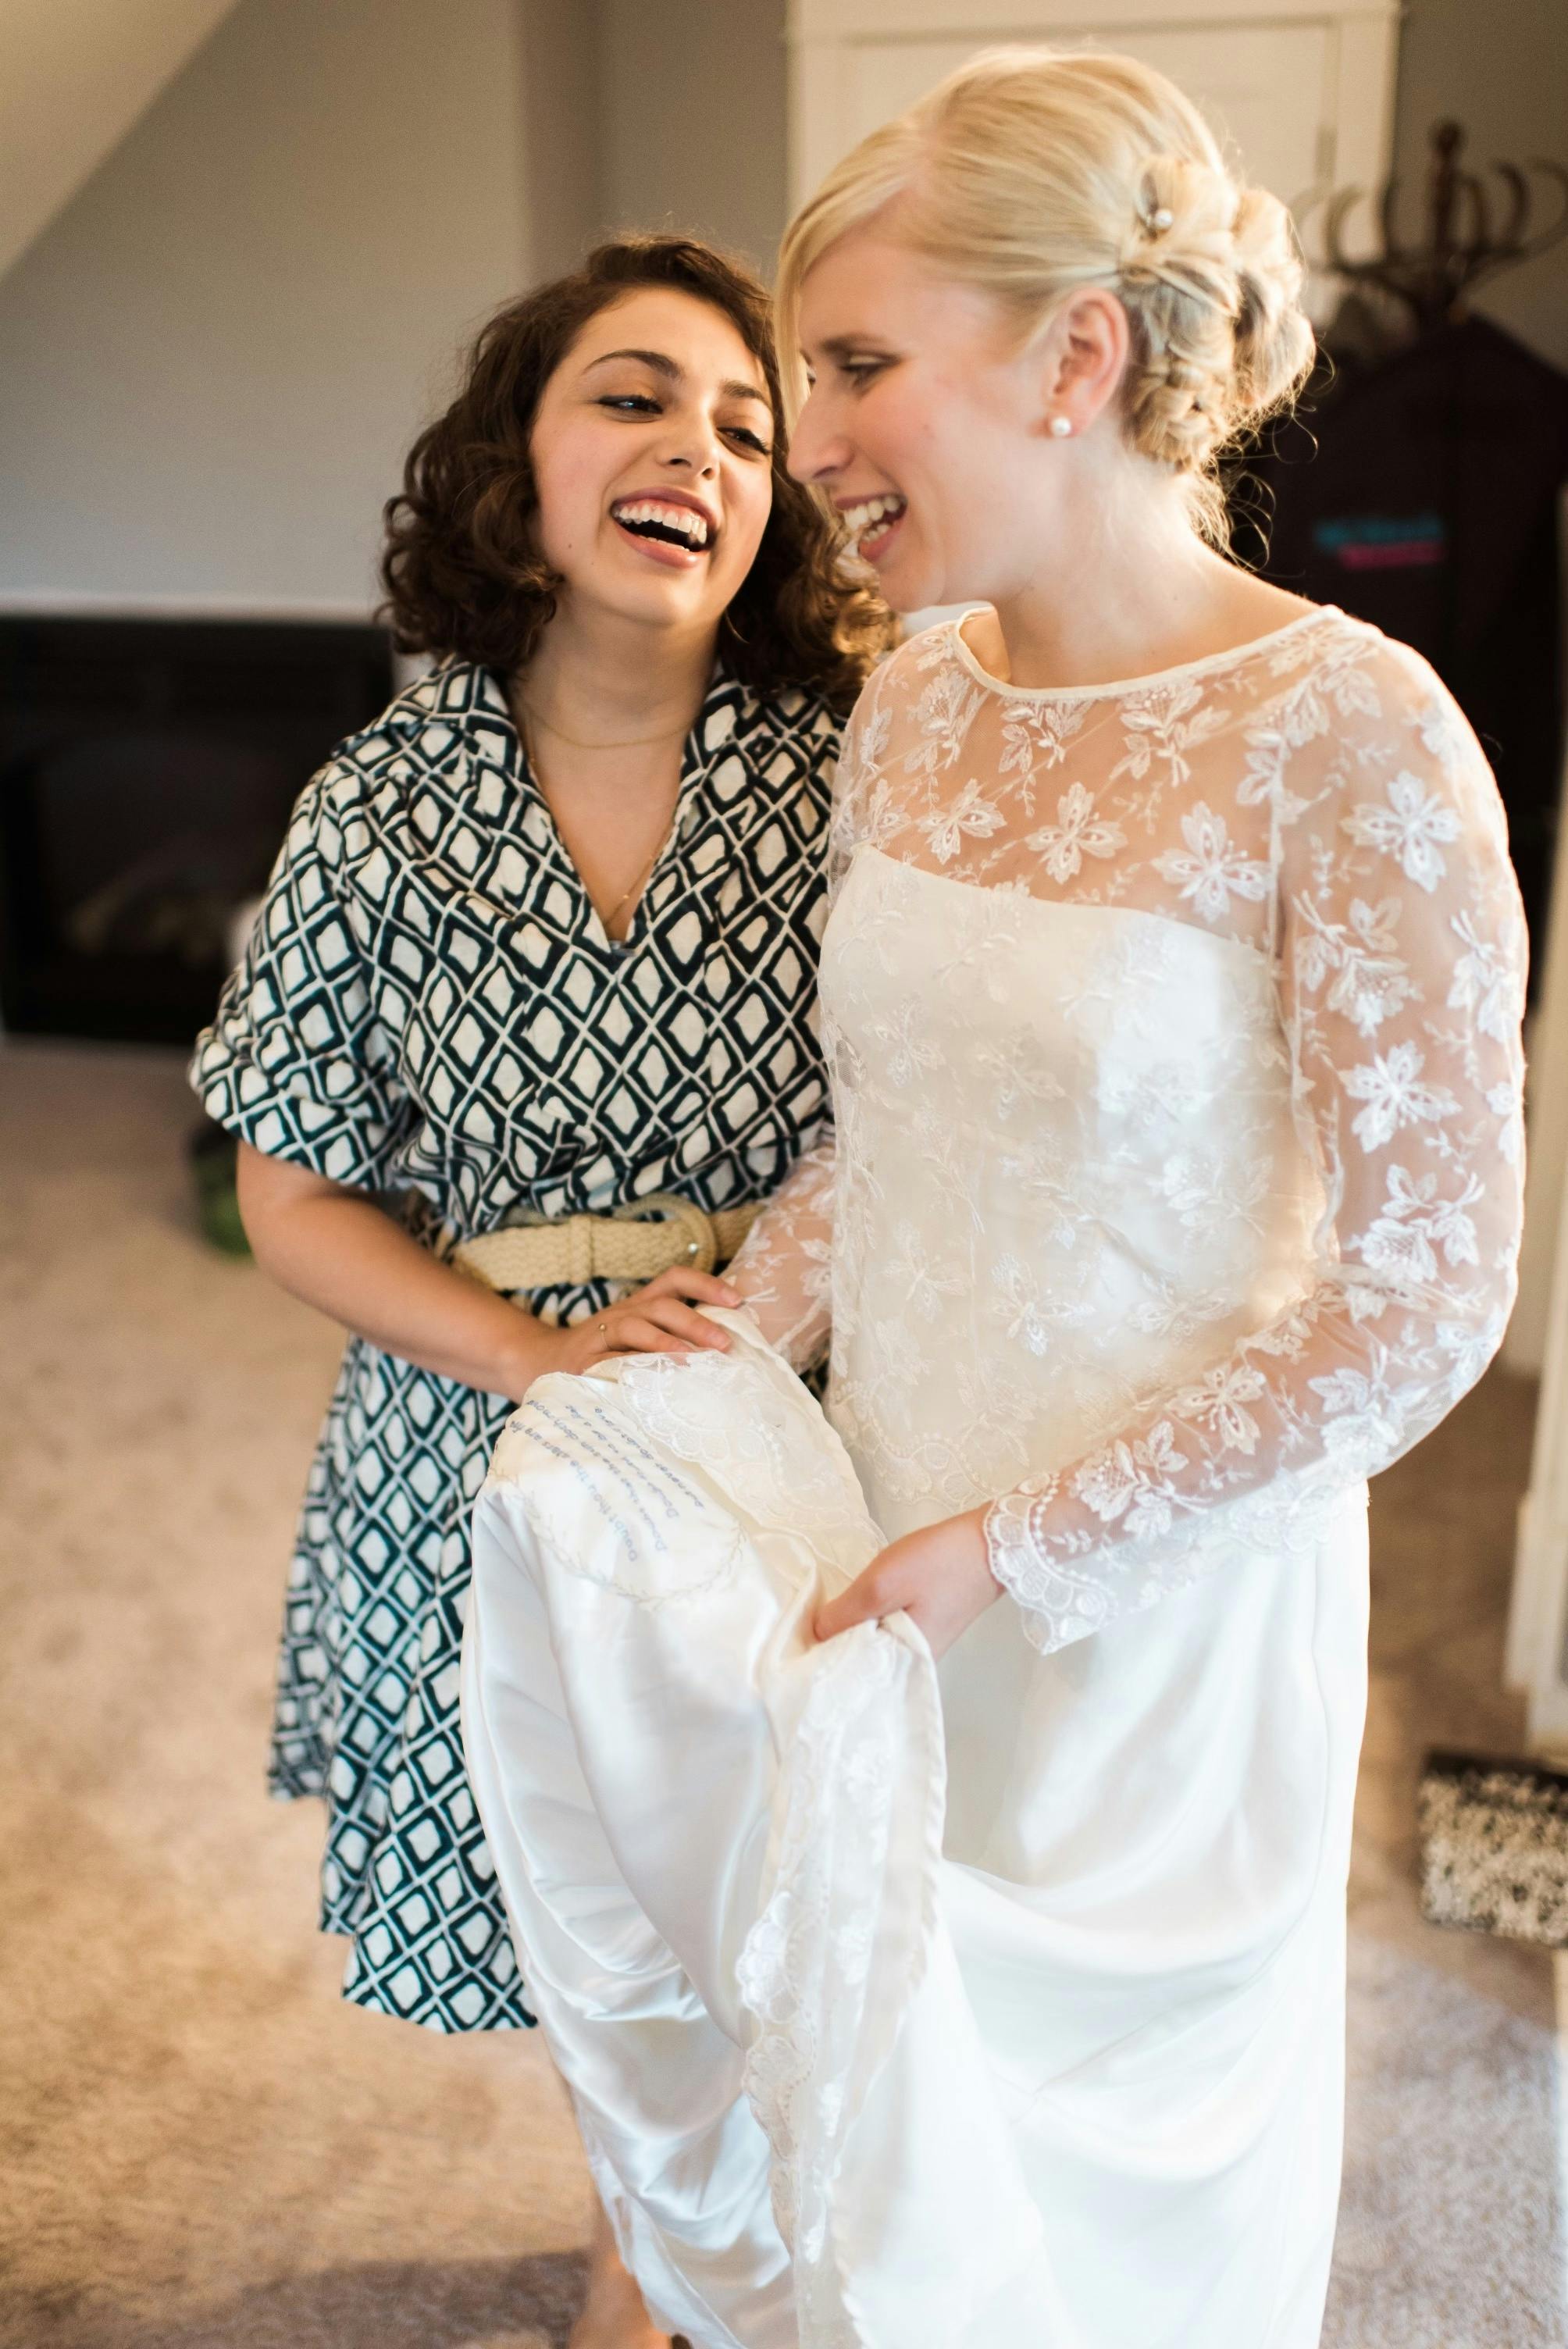 A bride in a white dress and me in a blue and white diamond patterned dress.